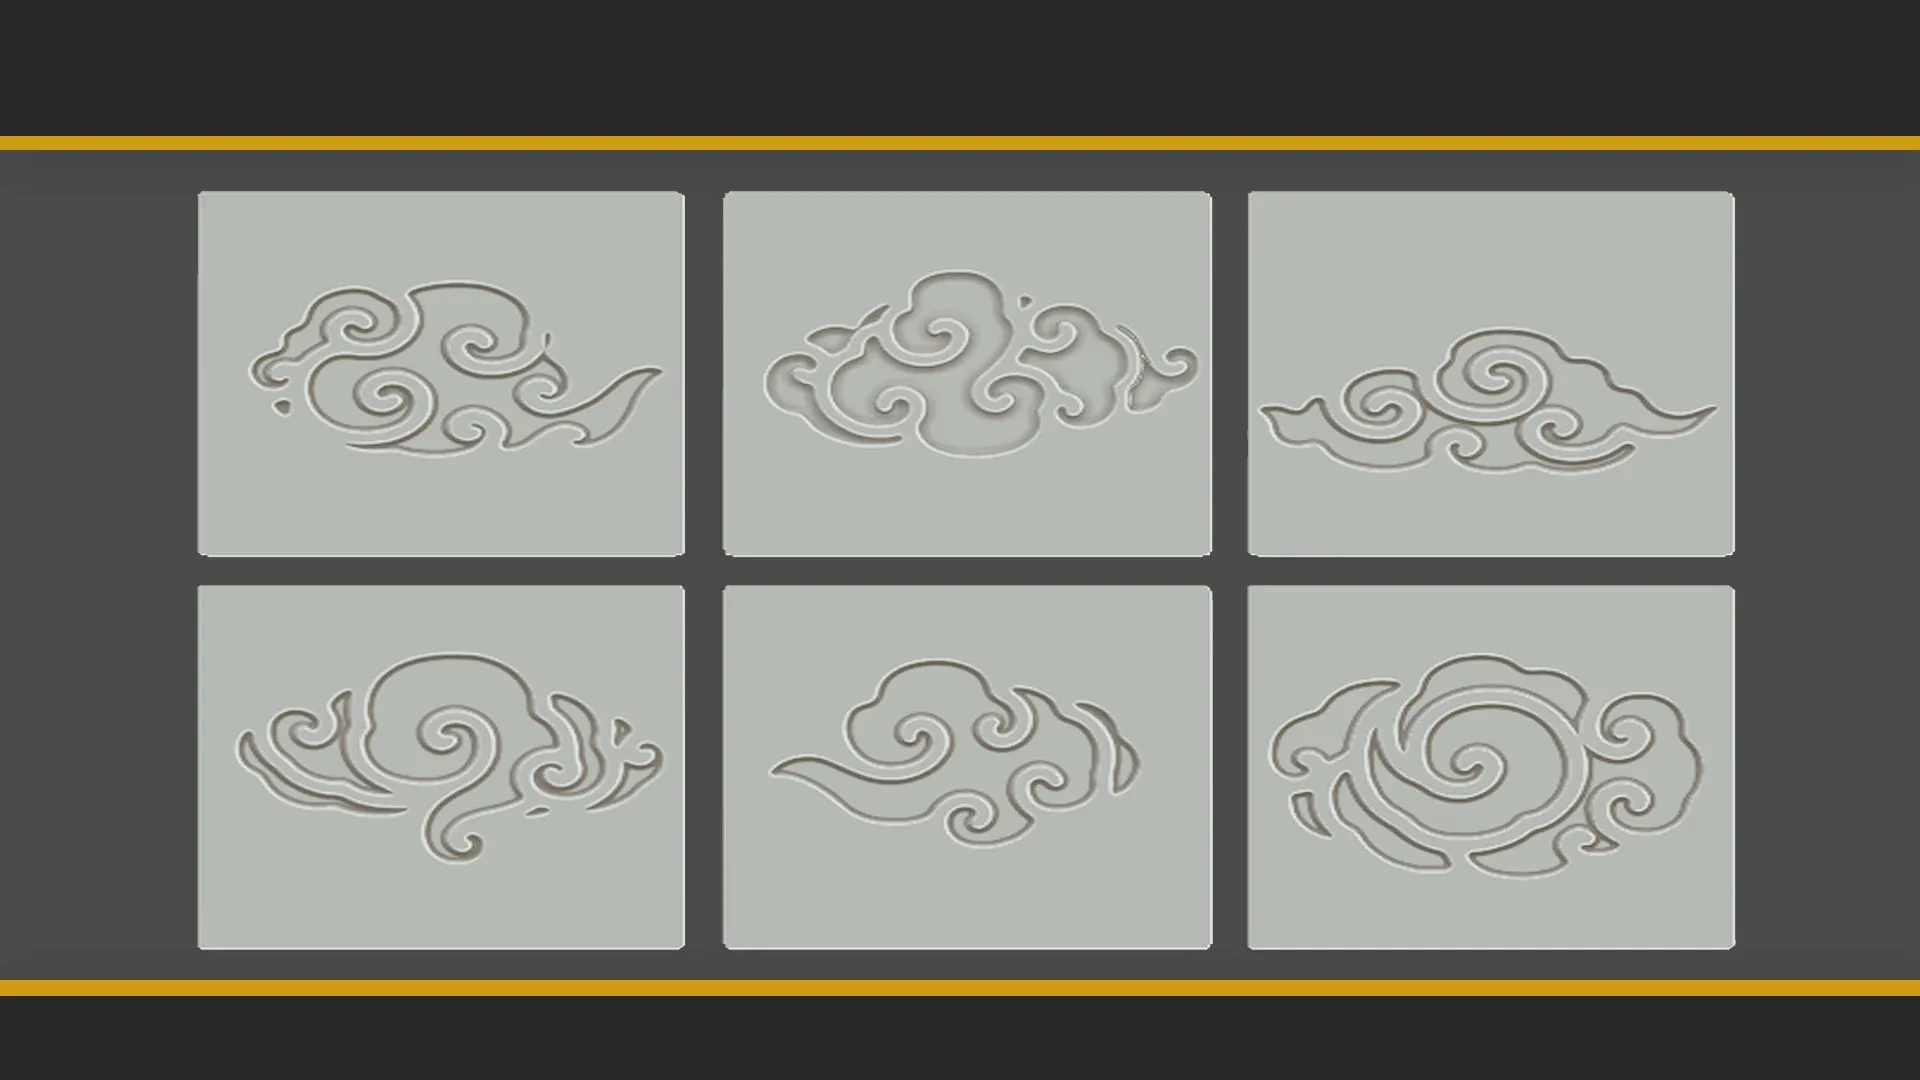 Stylized clouds in Japanese style